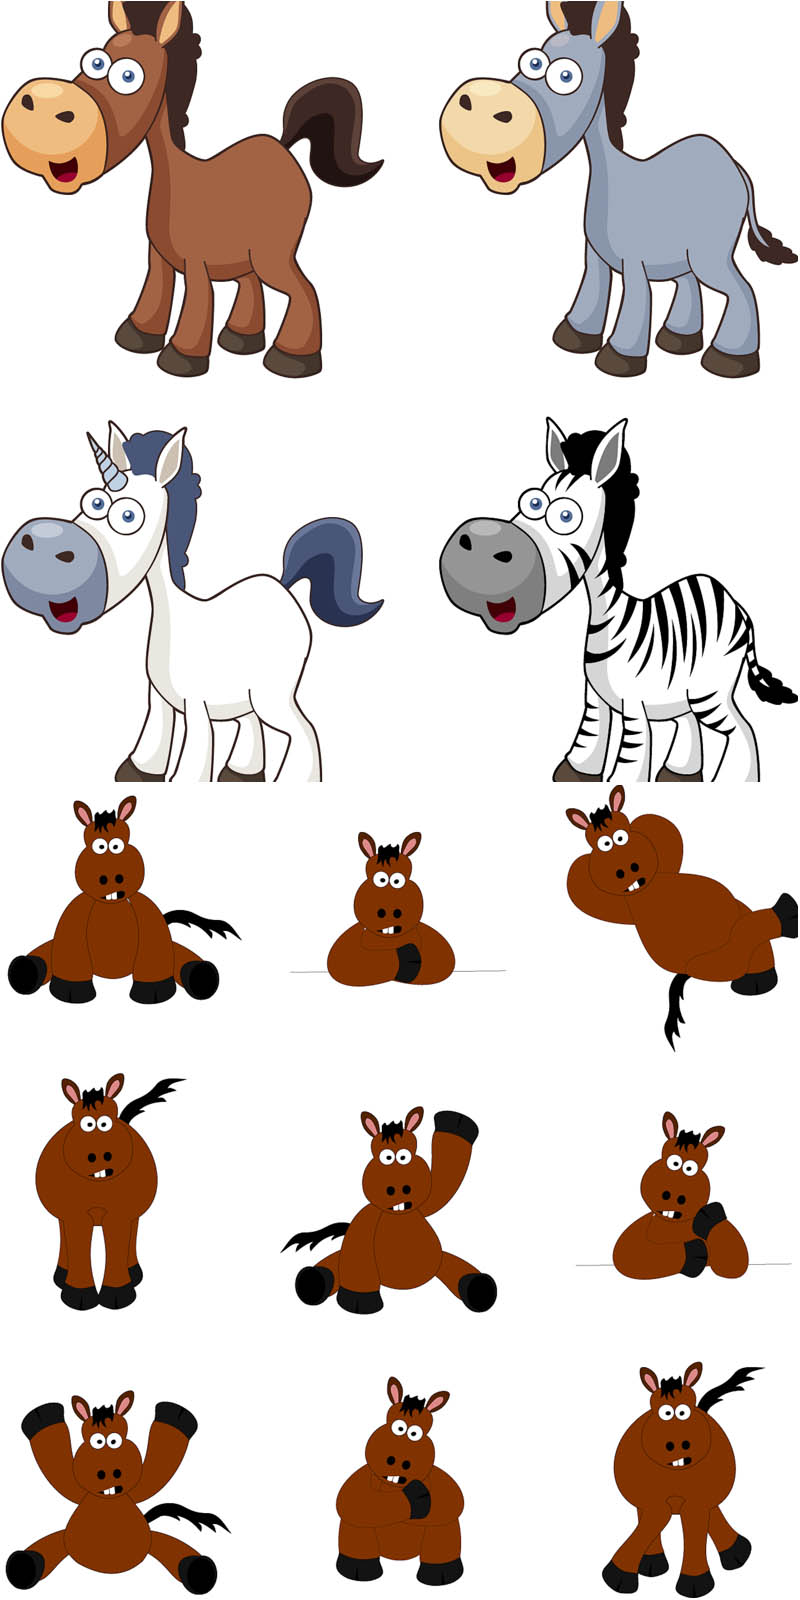 stock vector clip art and illustrations. Free for download. Set name: “Cartoon horse” for Adobe Illustrator